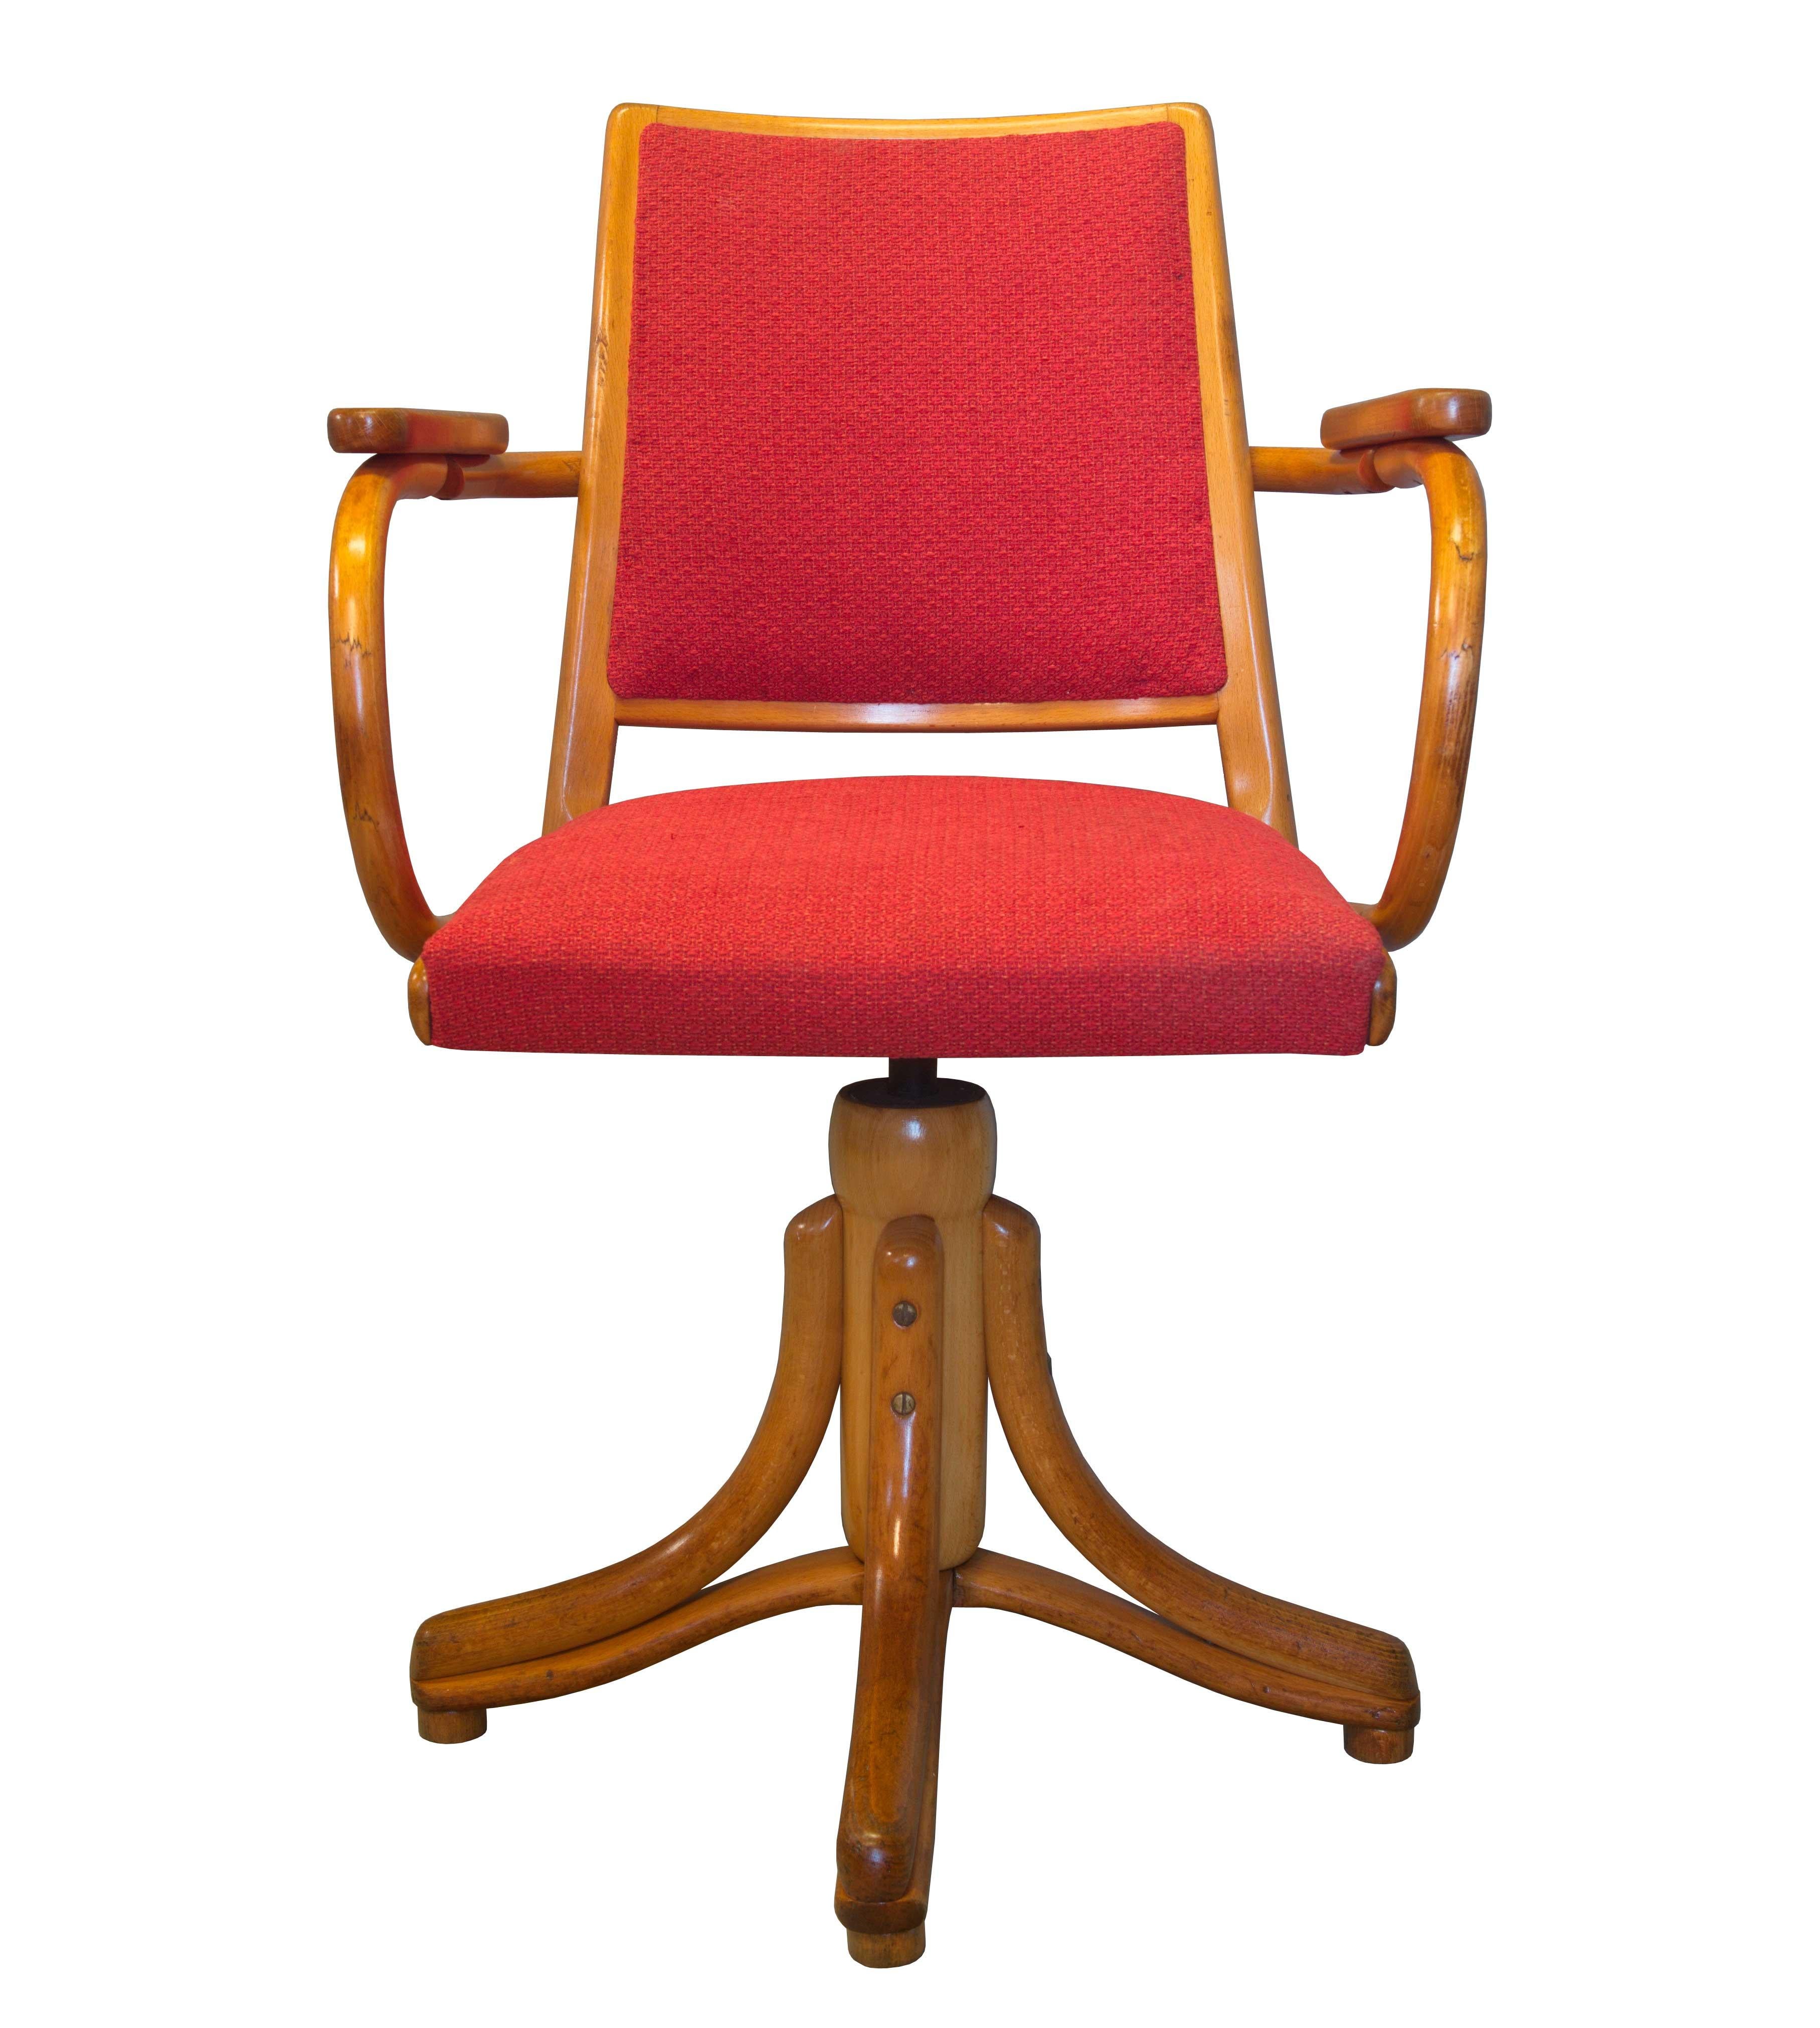 Elegant and timeless, this swivel armchair was designed and produced in the 1950’s by the TON Company in Czechoslovakia. It has however the markings of the LIGNA label, which can be seen on the underside of the chair seat. LIGNA was the sister